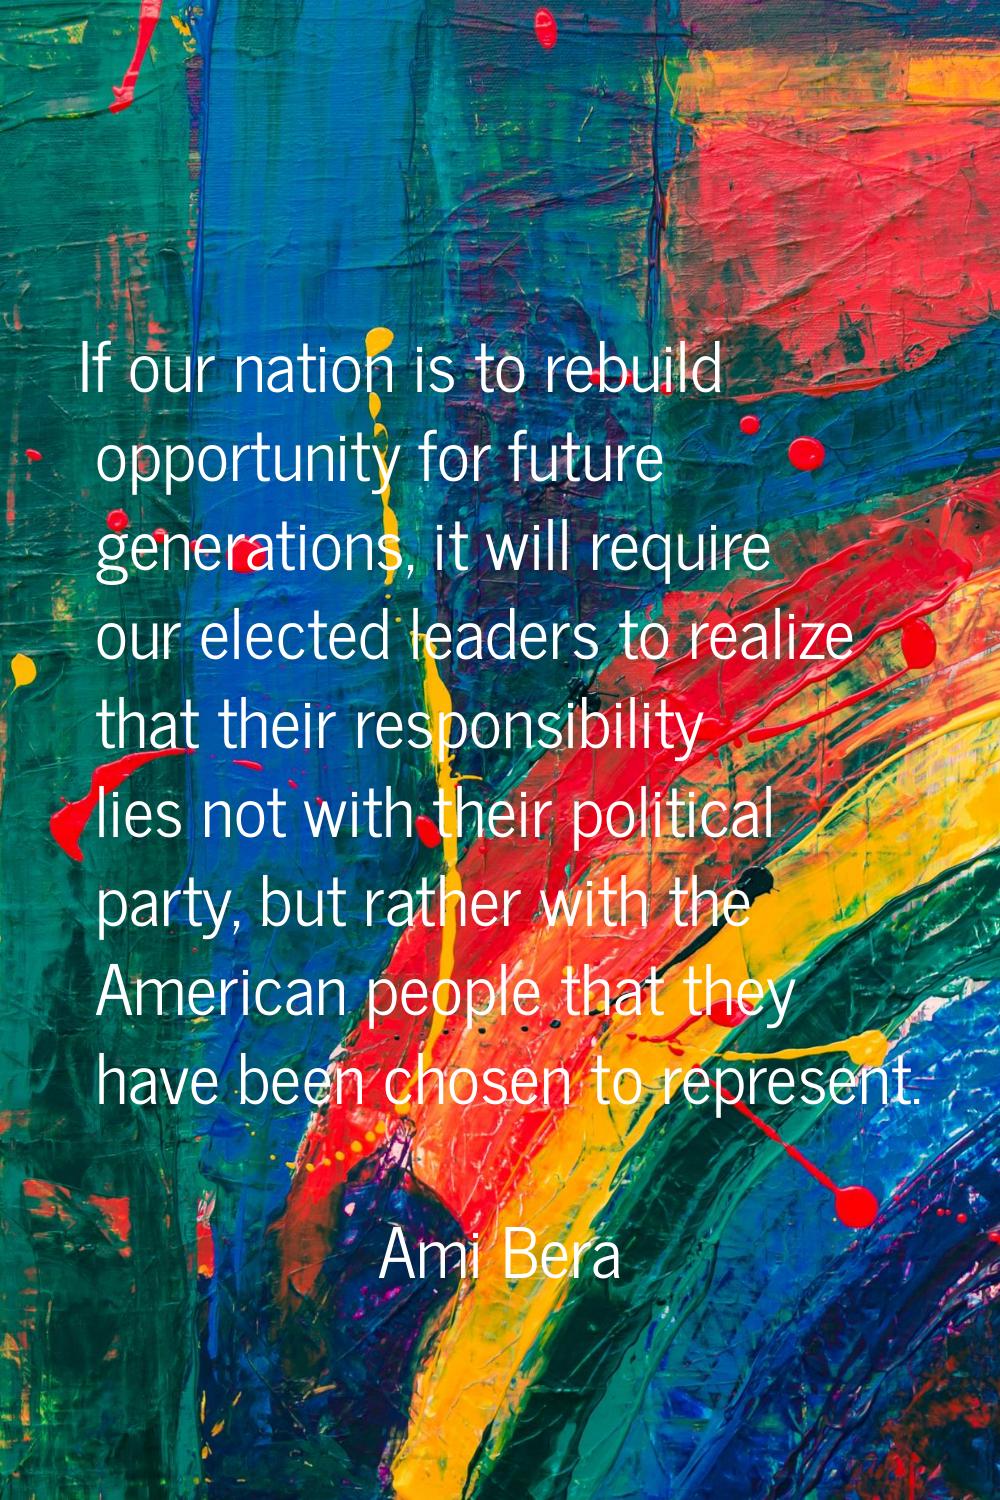 If our nation is to rebuild opportunity for future generations, it will require our elected leaders